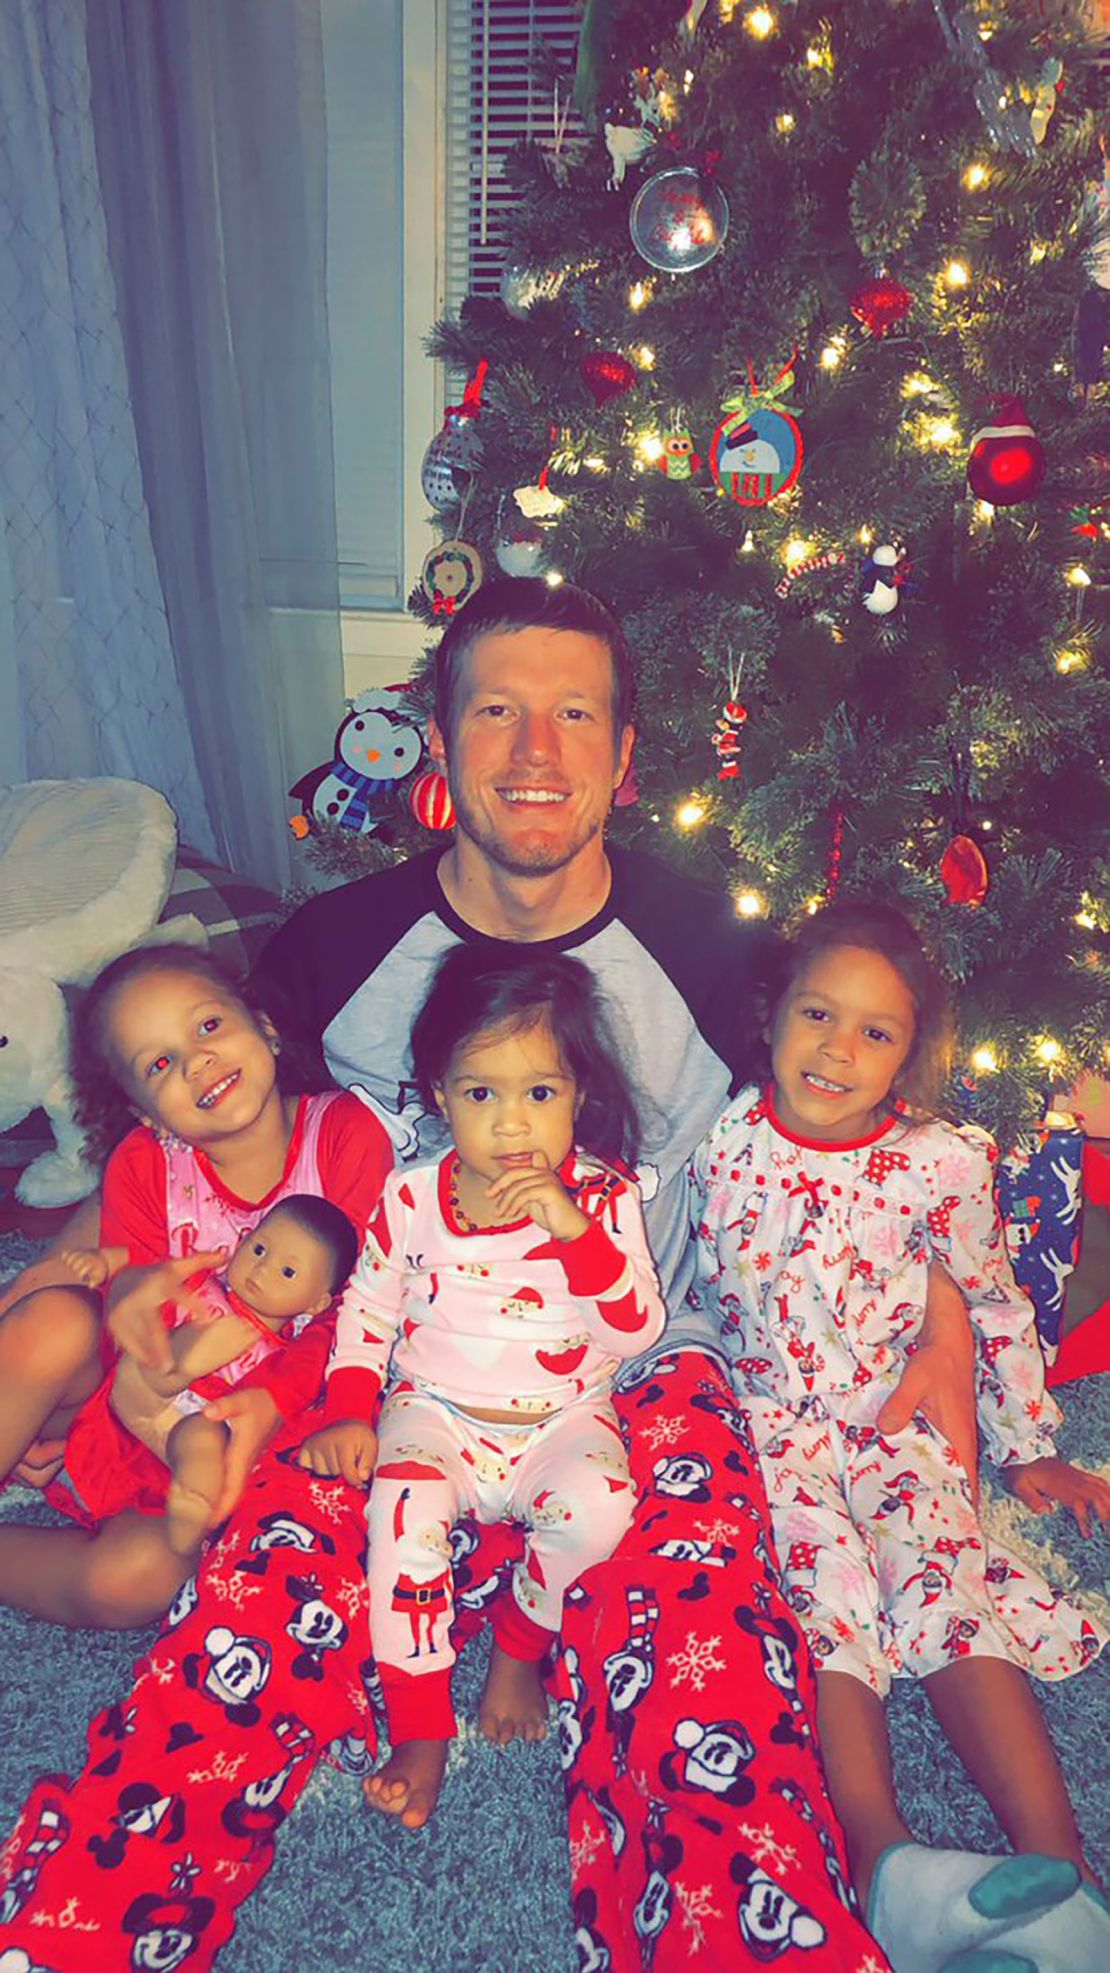 Matt Plyler with his daughters Millie, Mattie and Marleigh (from left to right).